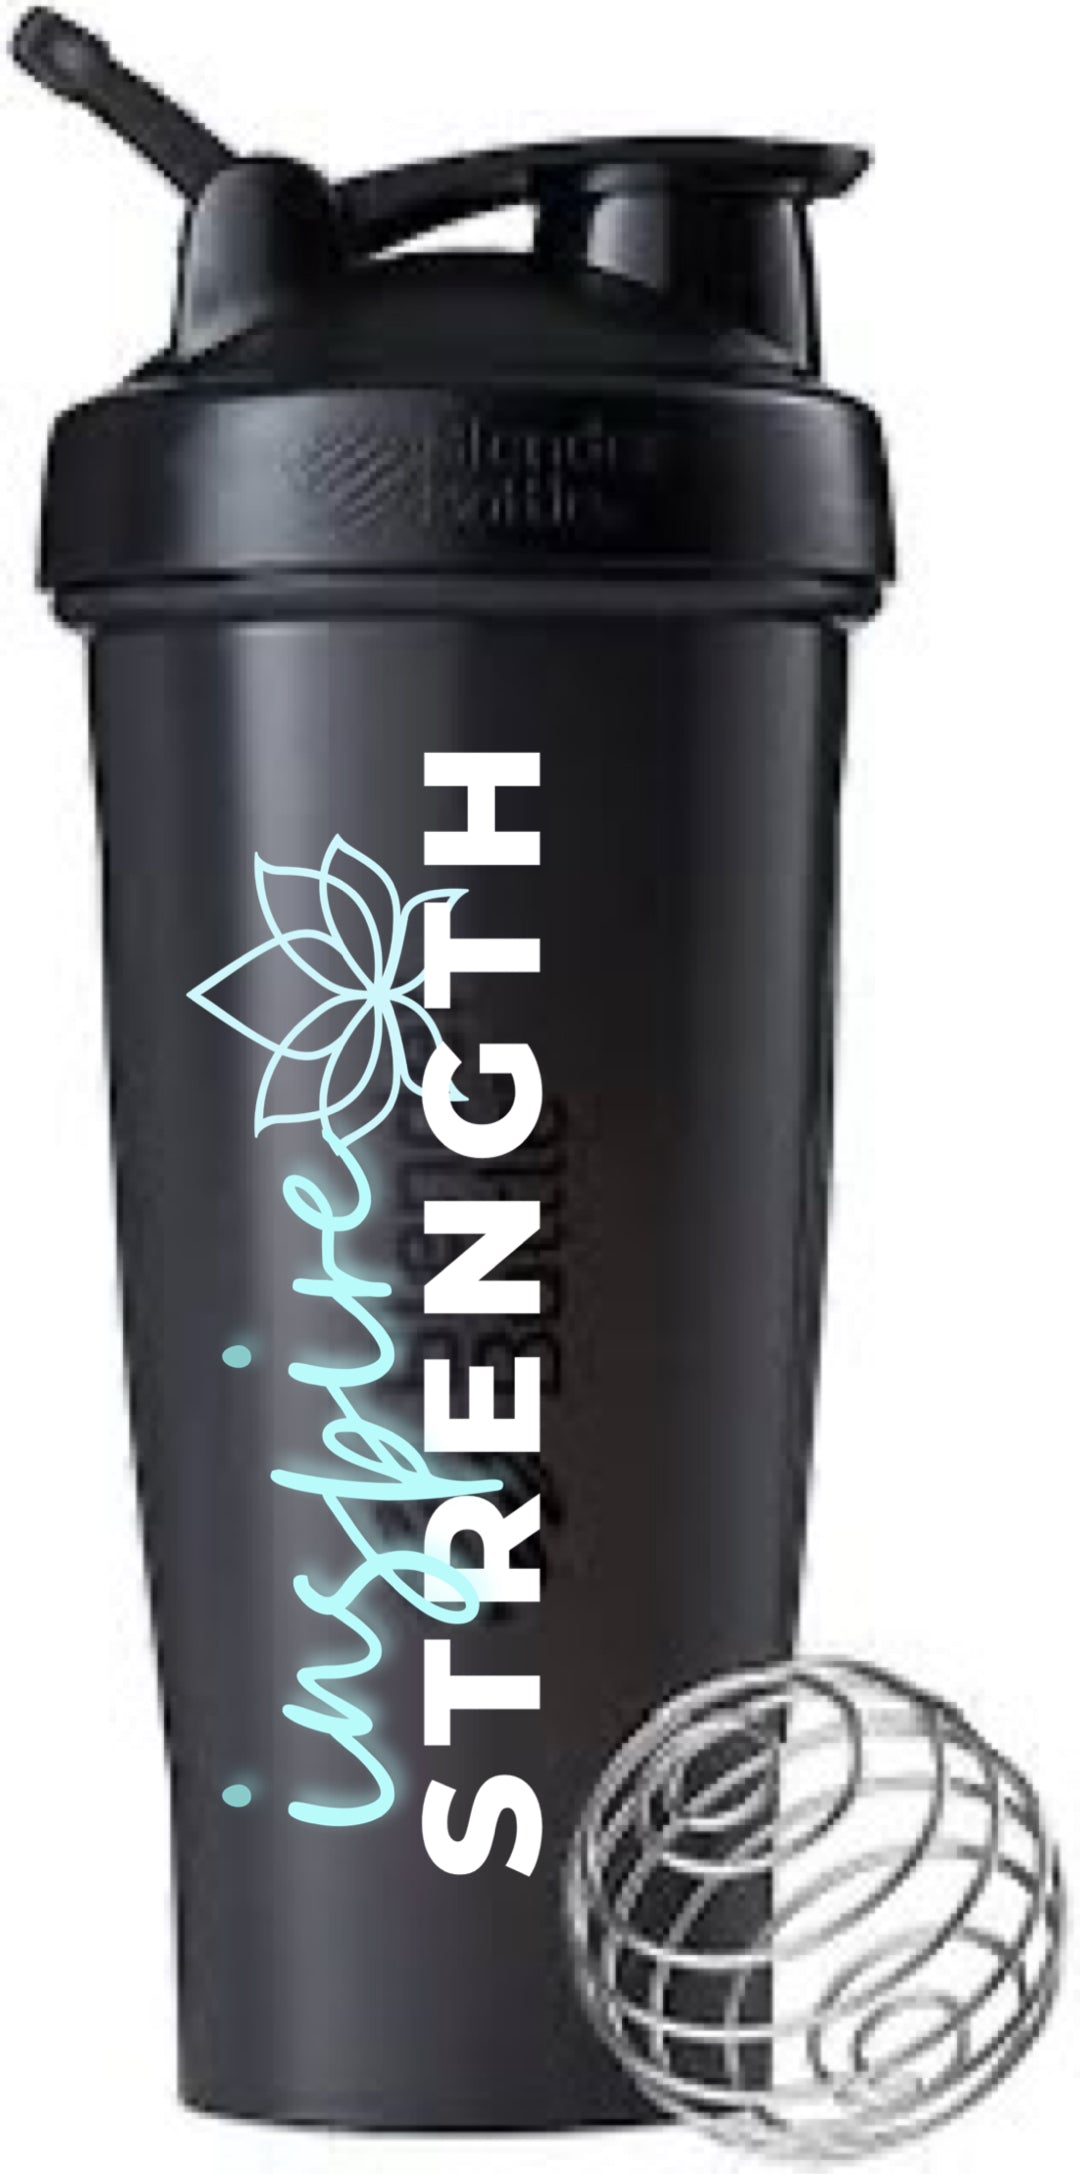 Inspire Strength TUMBLER/ CAN GLASS/ HAT COLLECTION